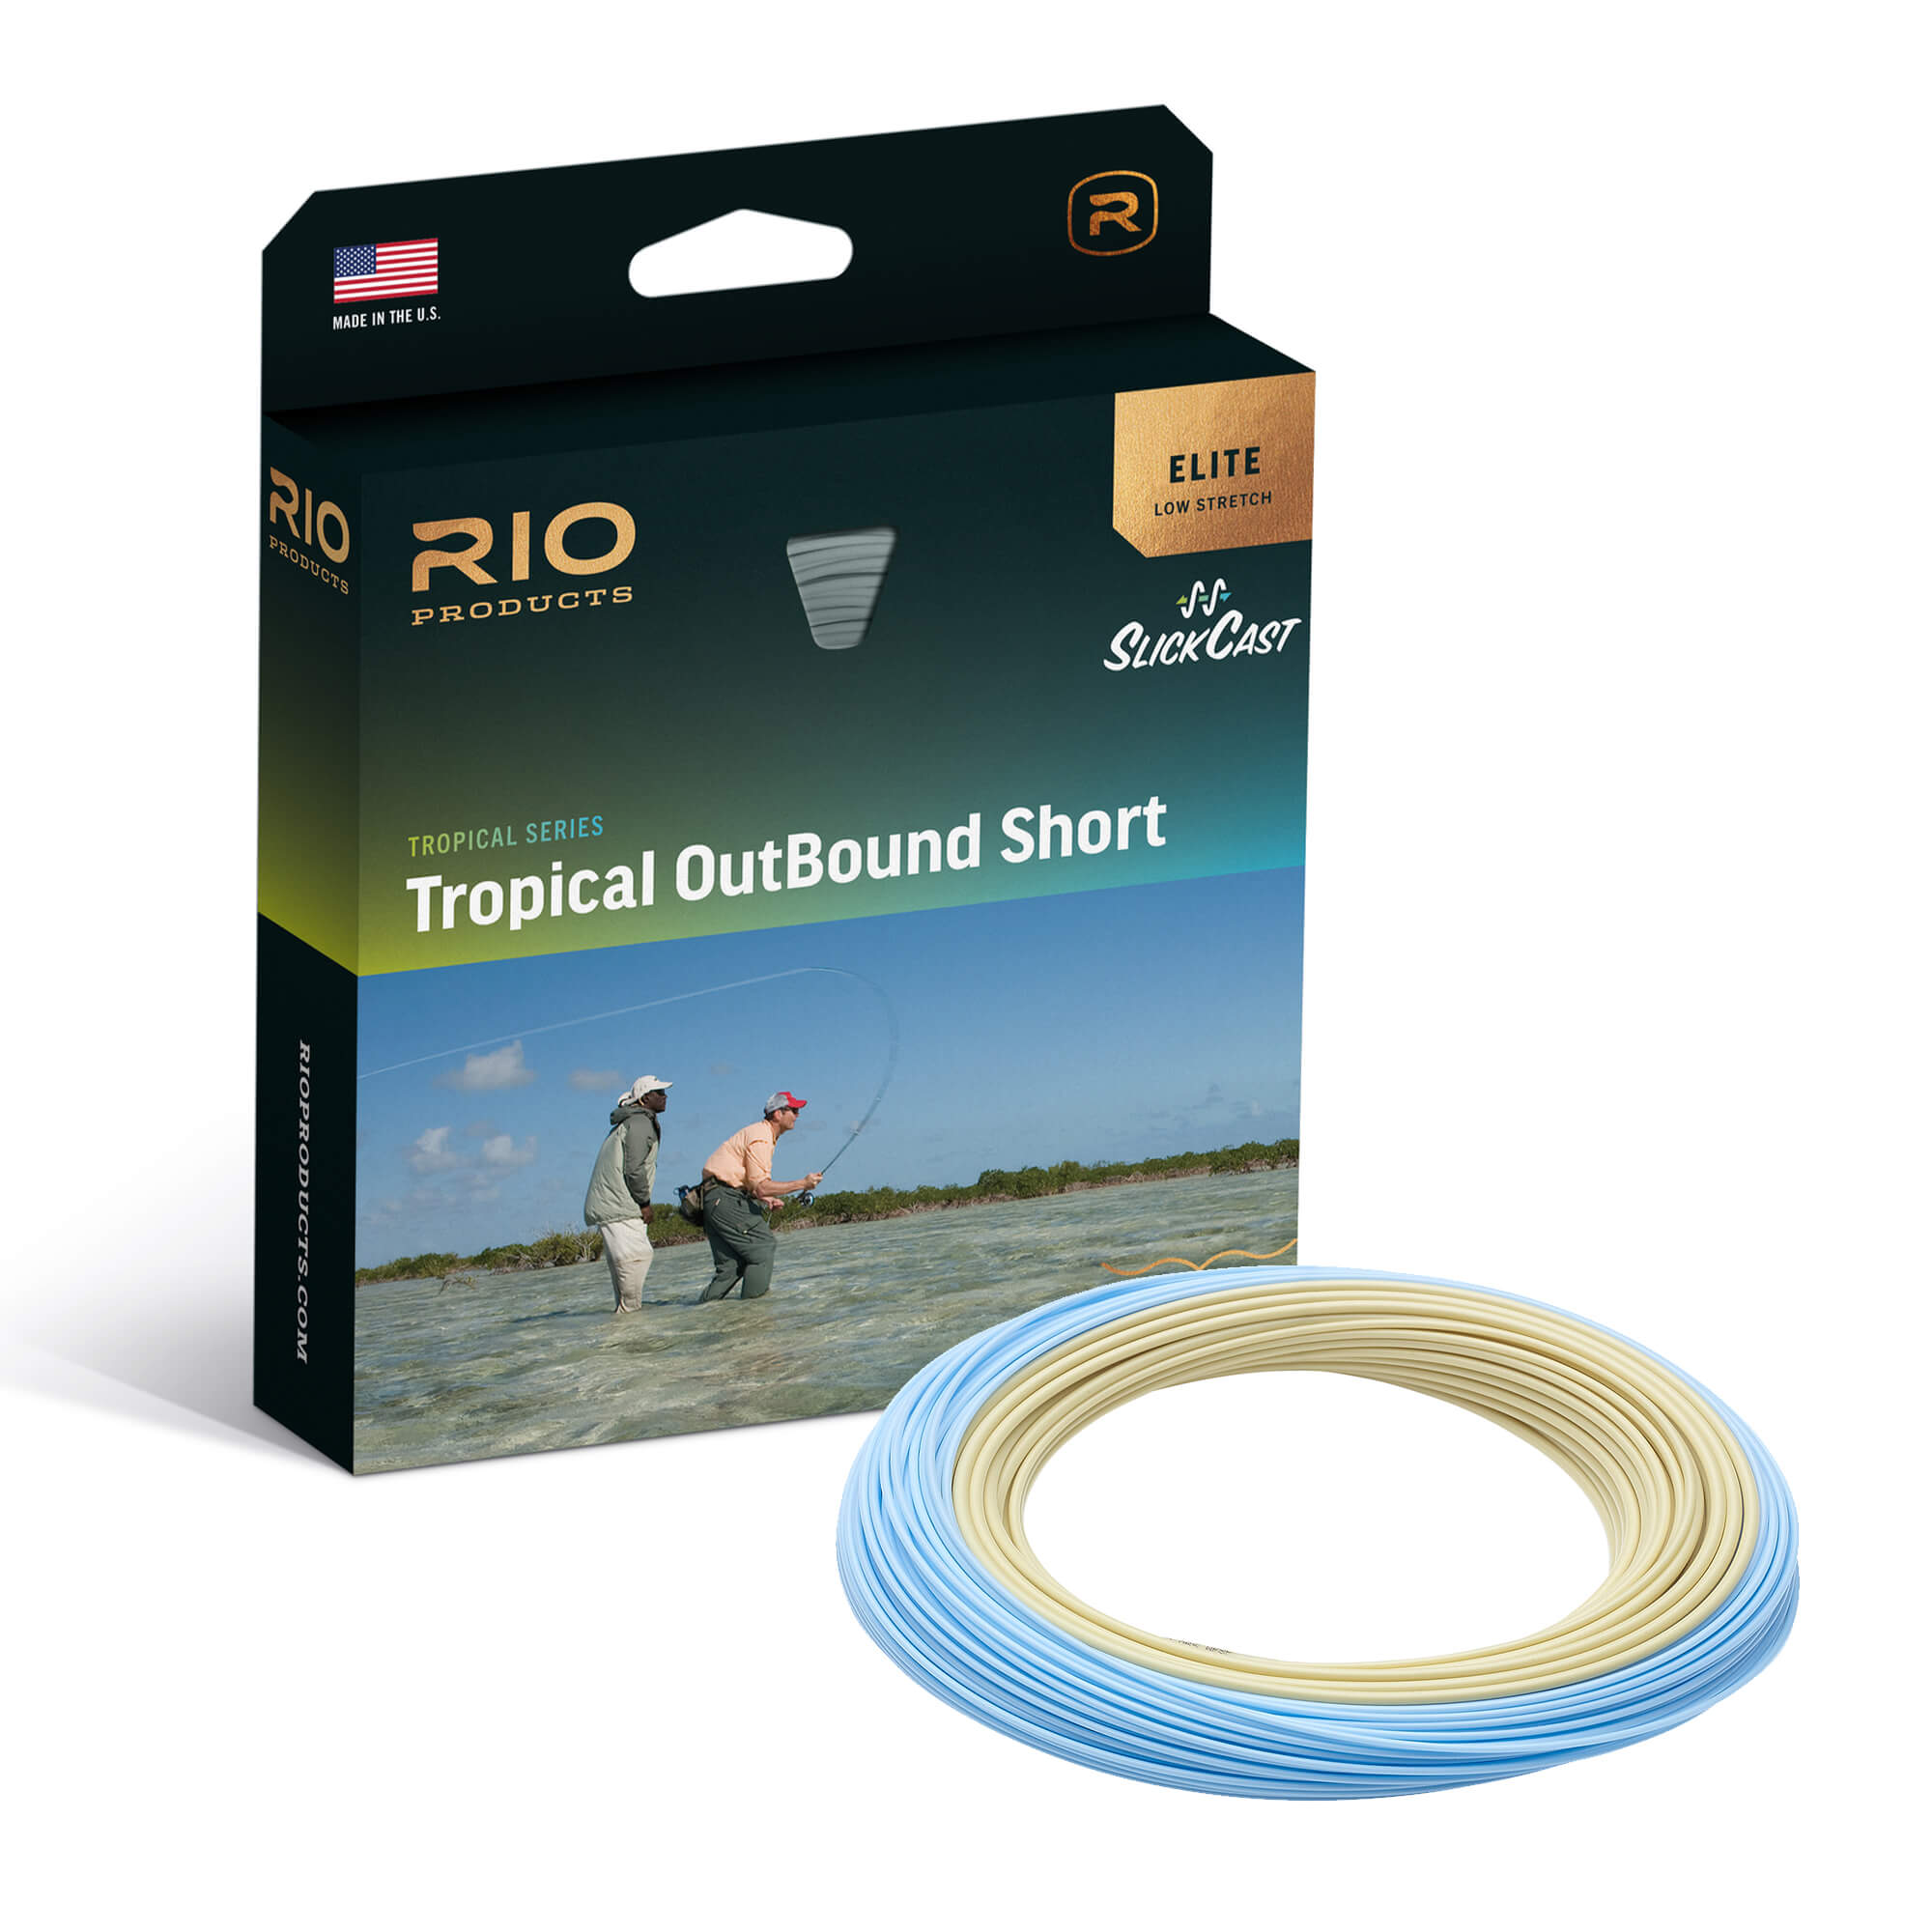 RIO Elite Tropical Outbound Short Fly Line – Guide Flyfishing, Fly Fishing  Rods, Reels, Sage, Redington, RIO